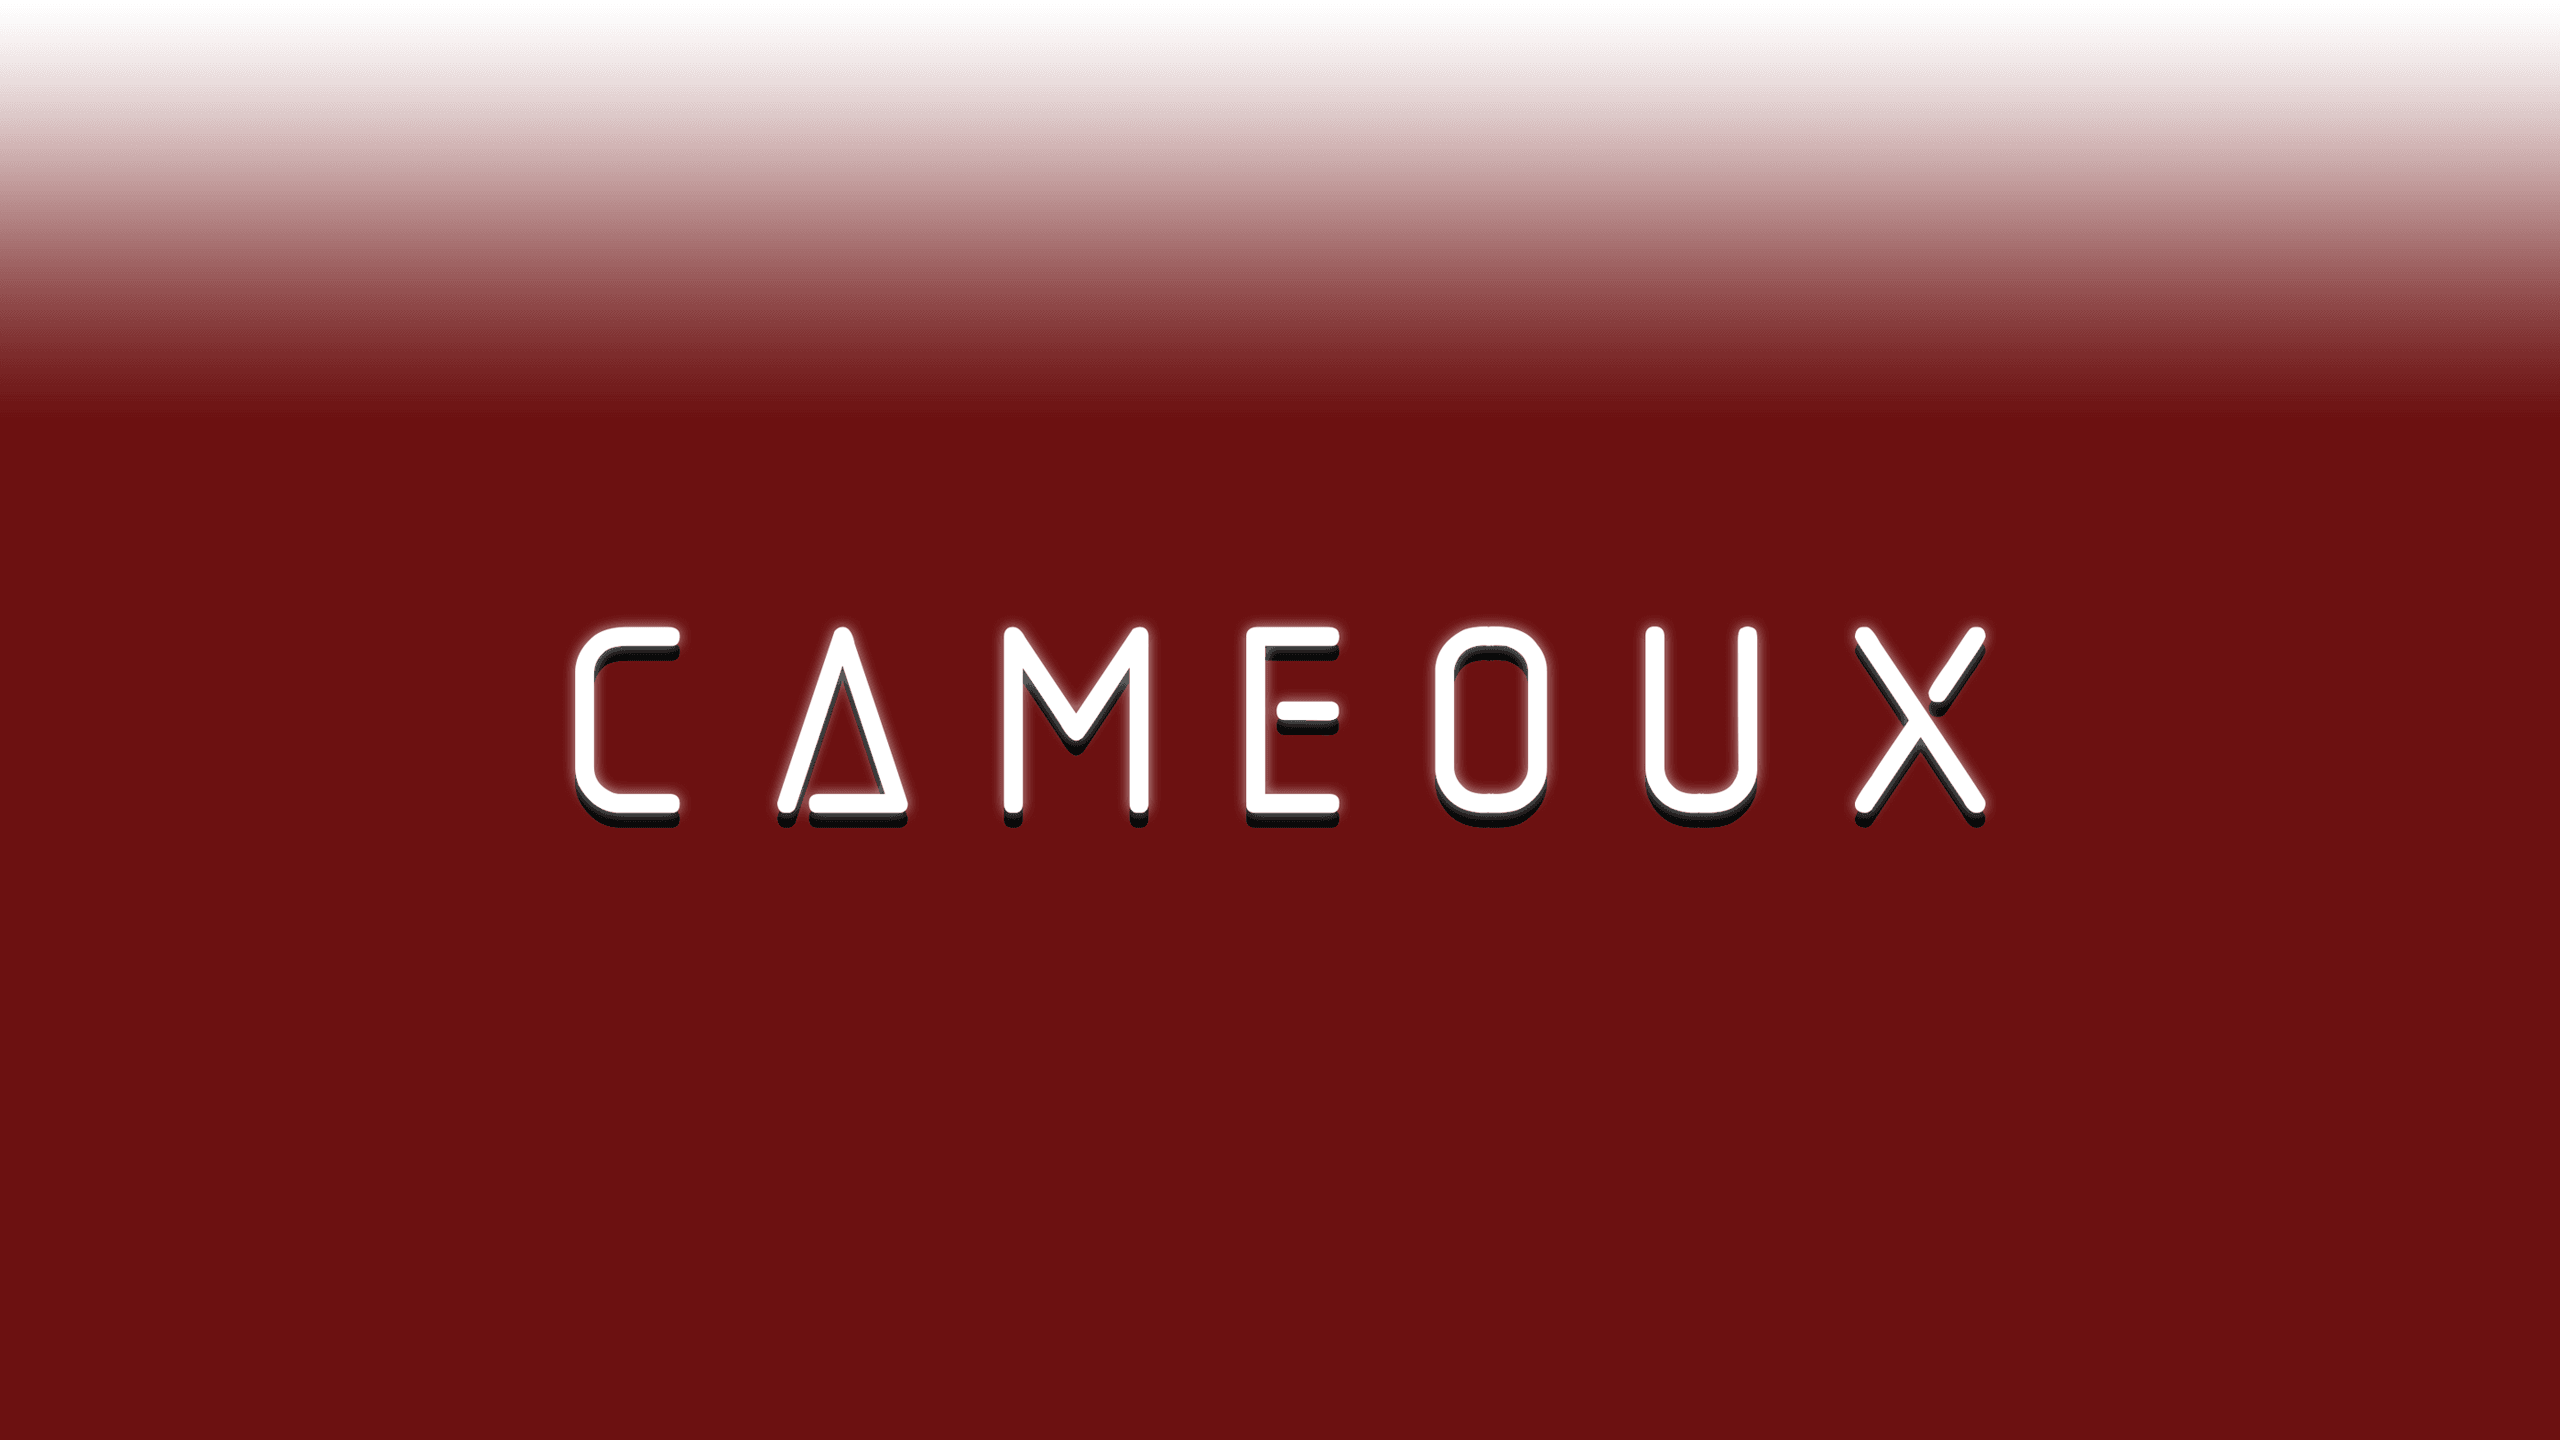 Cameoux banner